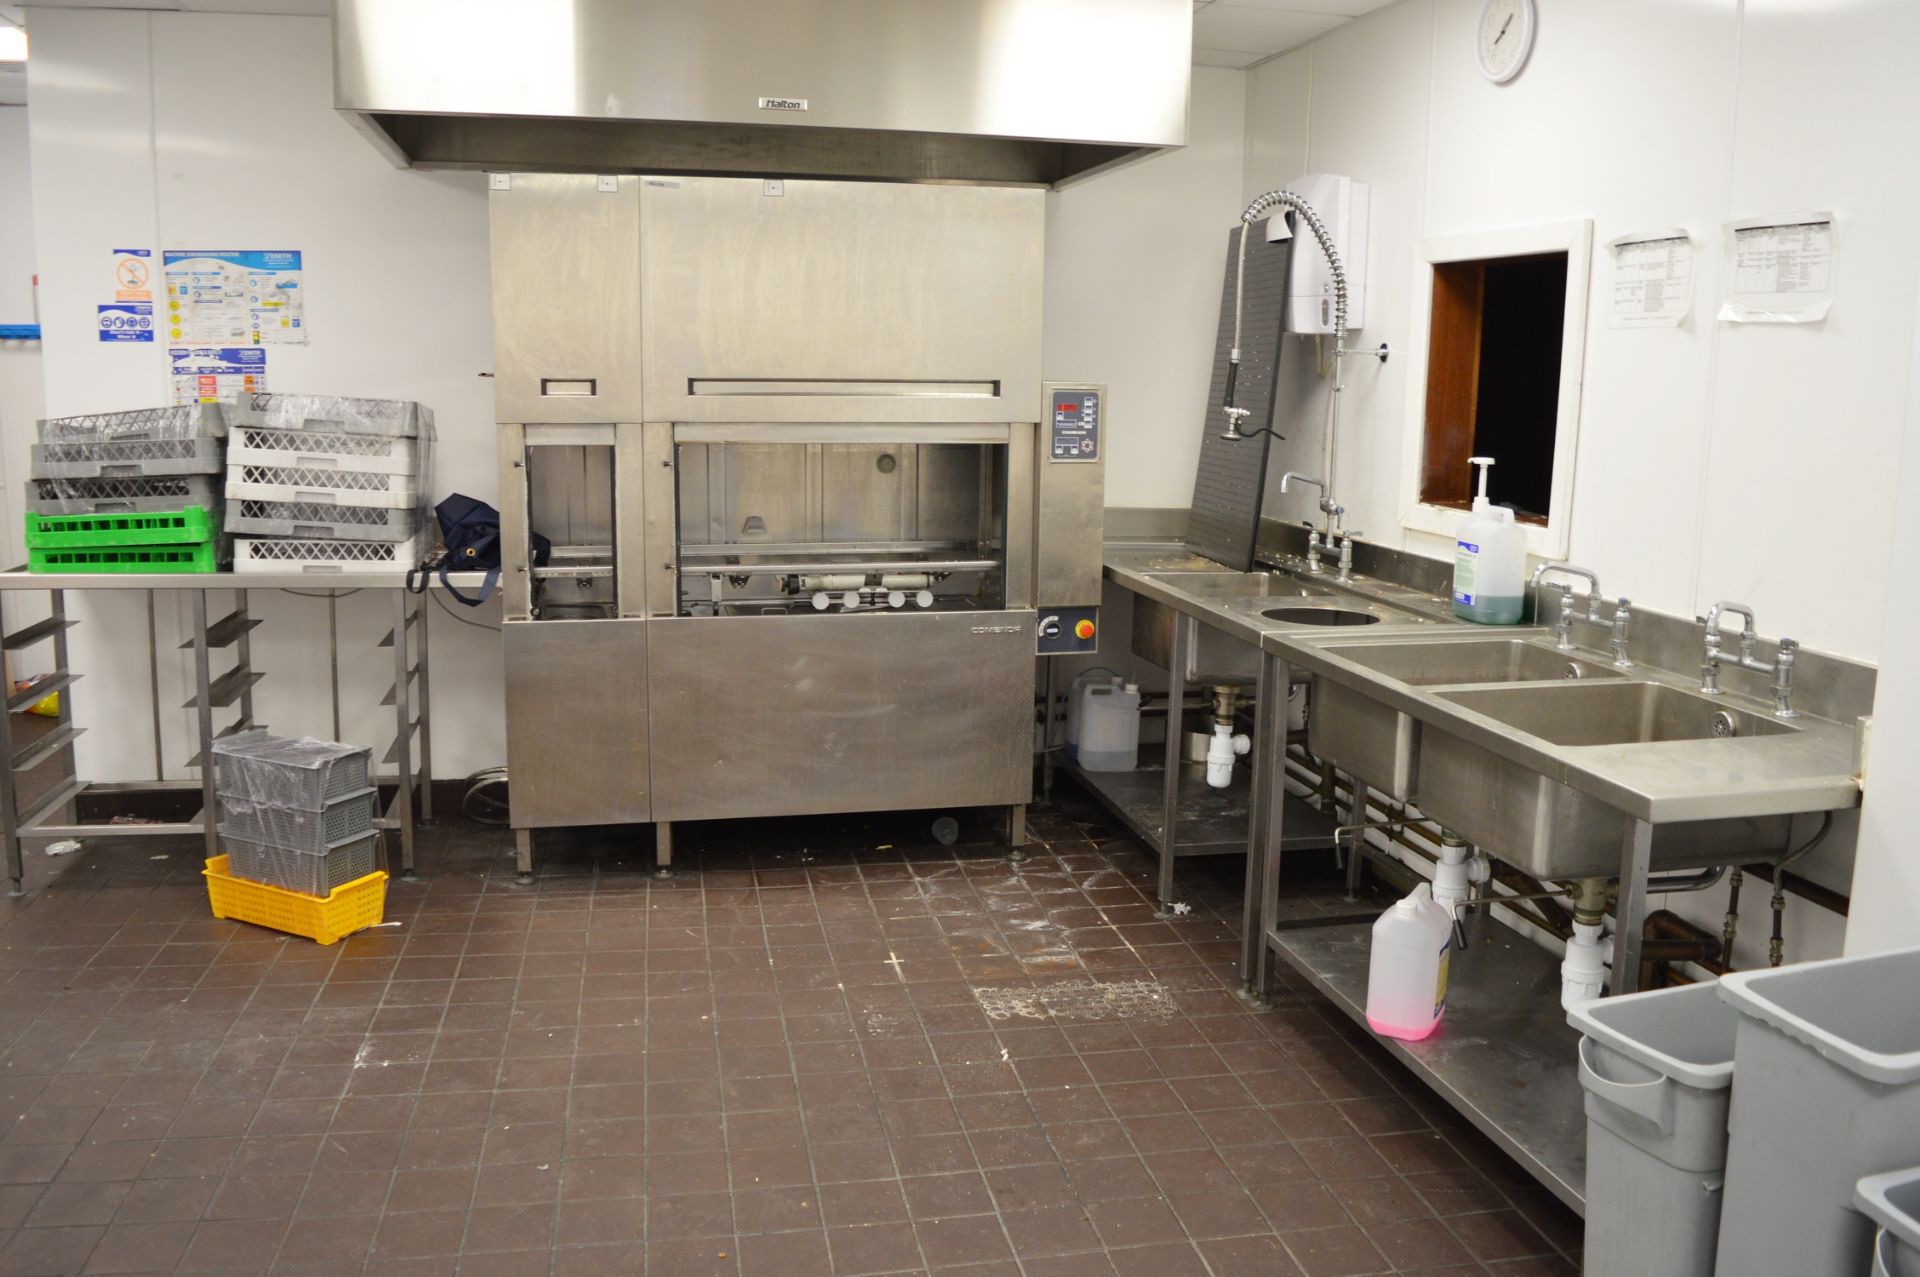 1 x Comenda AC2E Series Rack Conveyor Dish and Pot Washing Station - All Stainless Steel - Full